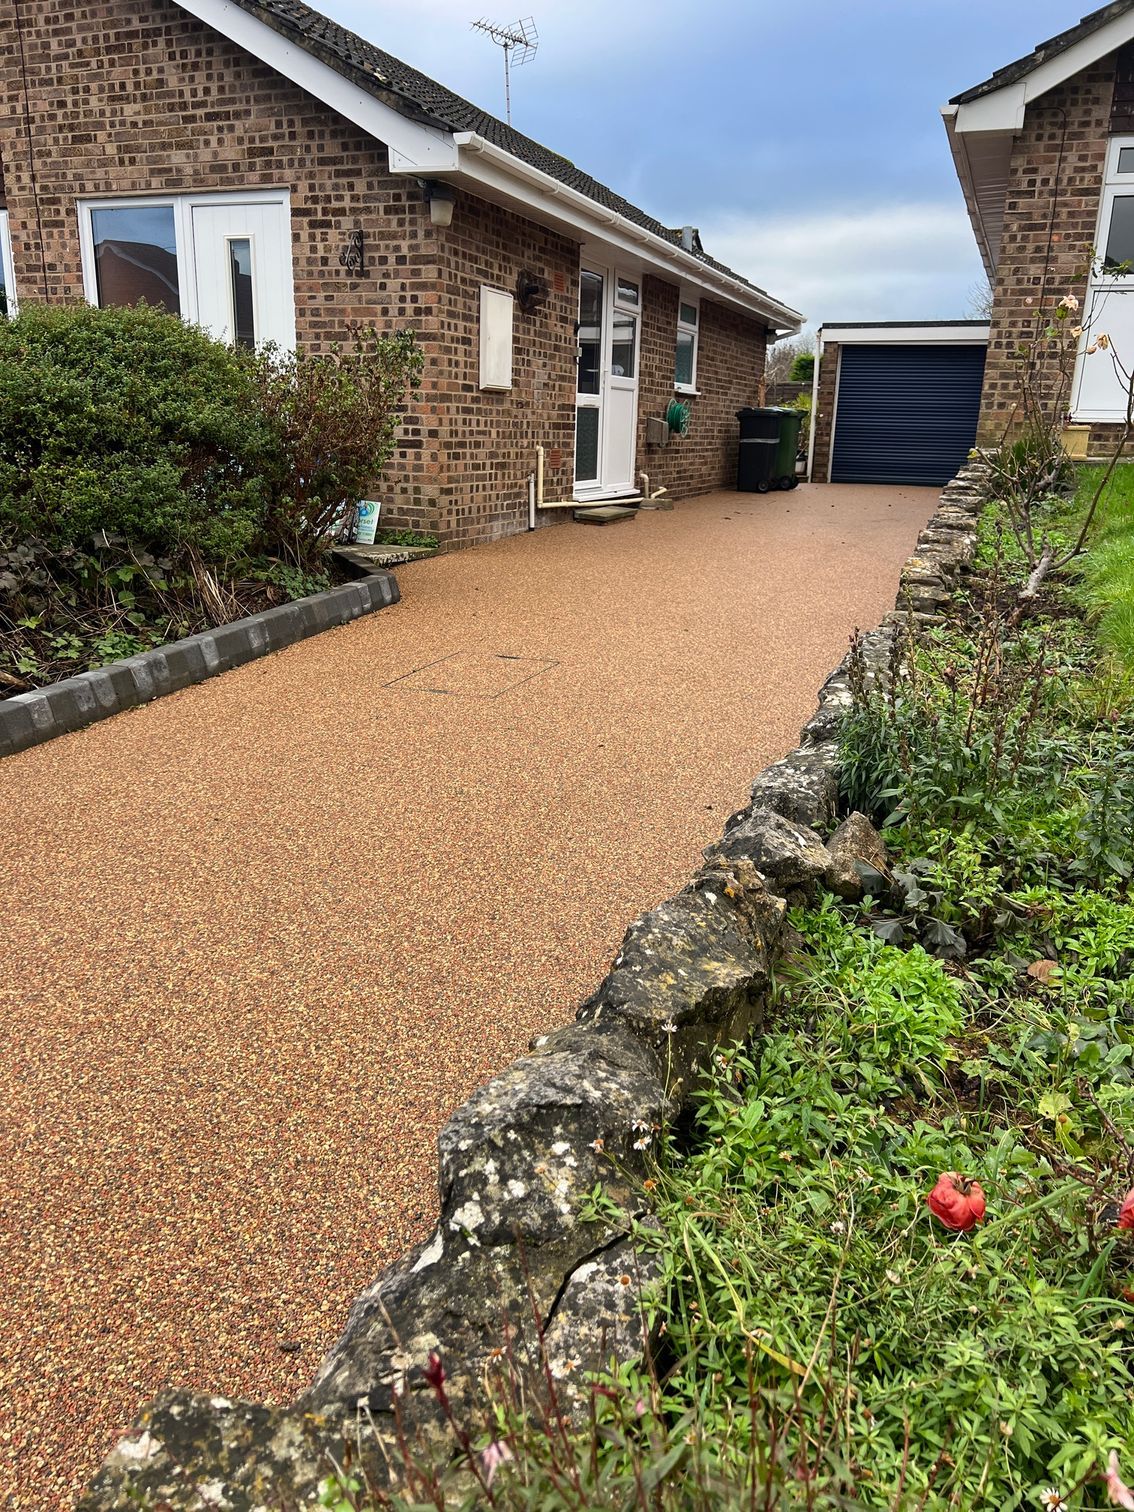 Brown resin driveway outside a row of bungalows, surrounded by a stone wall border.